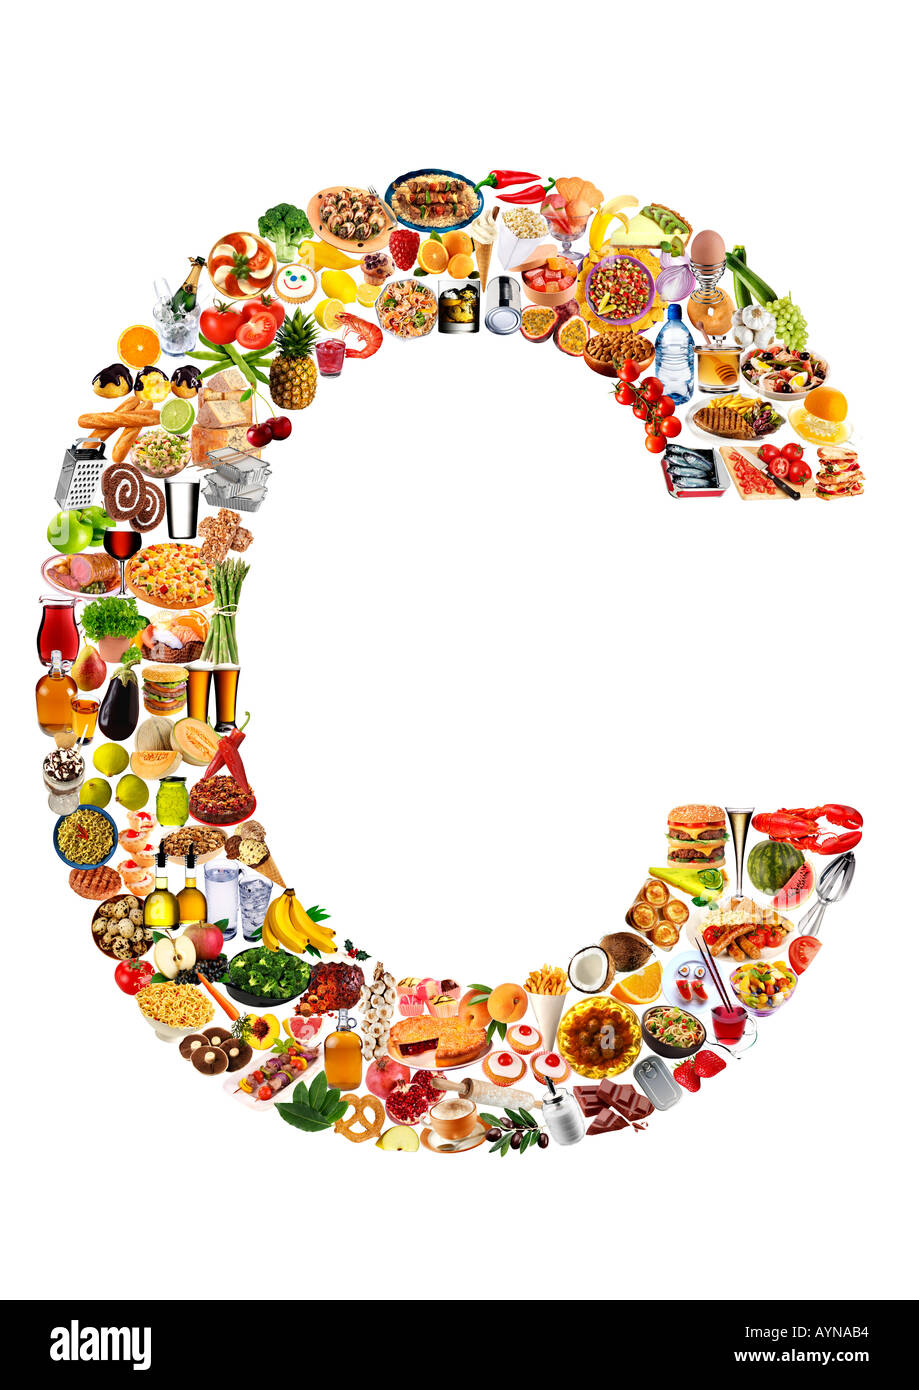 FOODFONT LETTER C ON WHITE Stock Photo